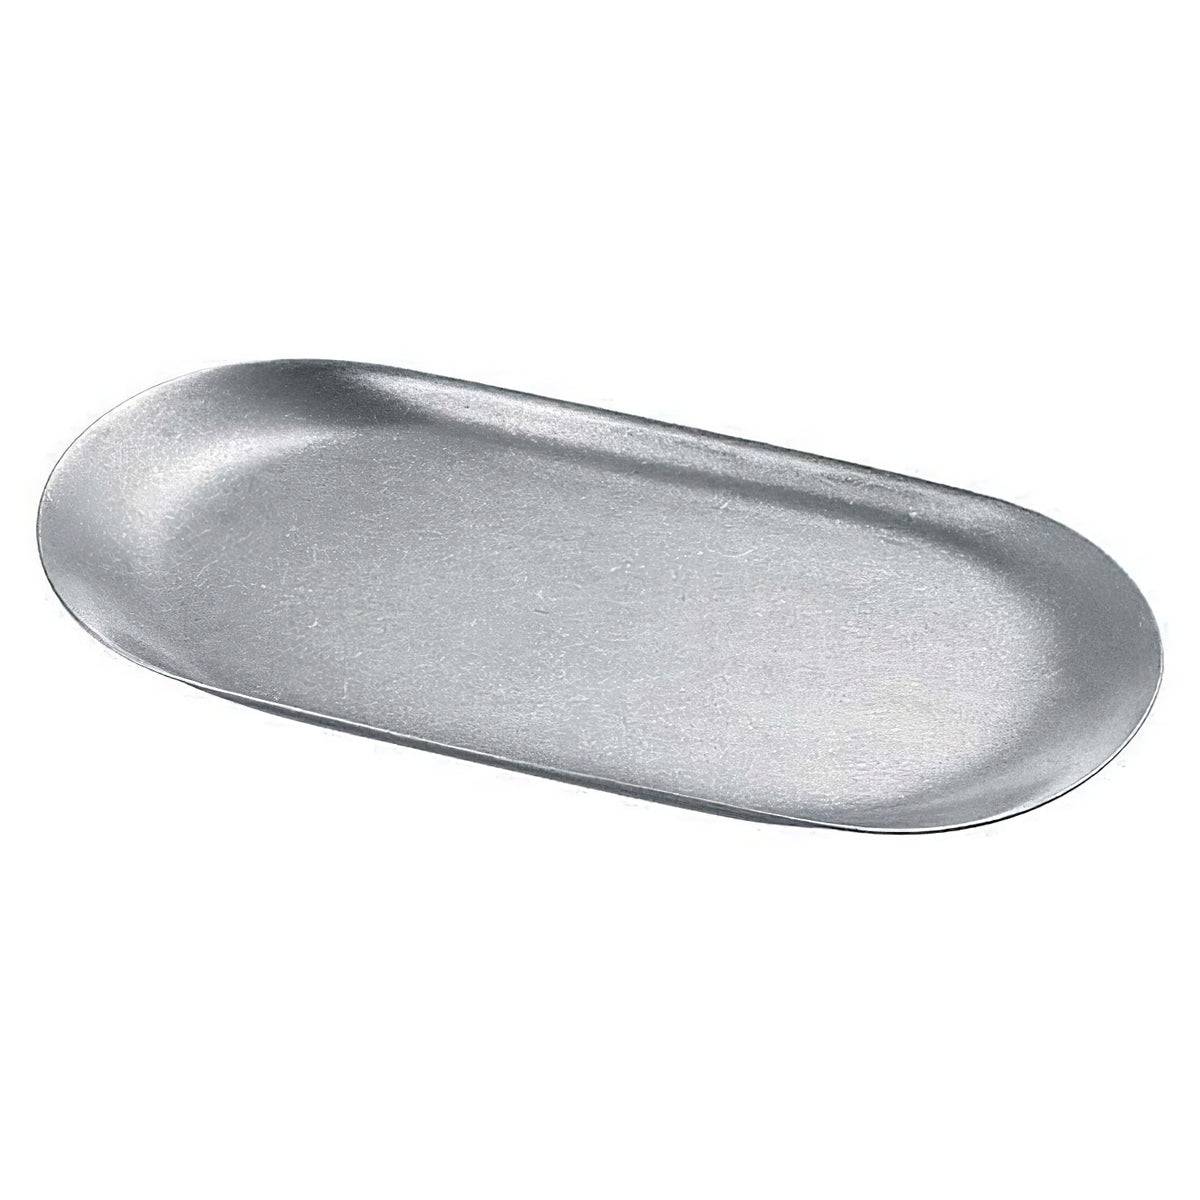 AOYOSHI VINTAGE Stainless Steel Cash Tray